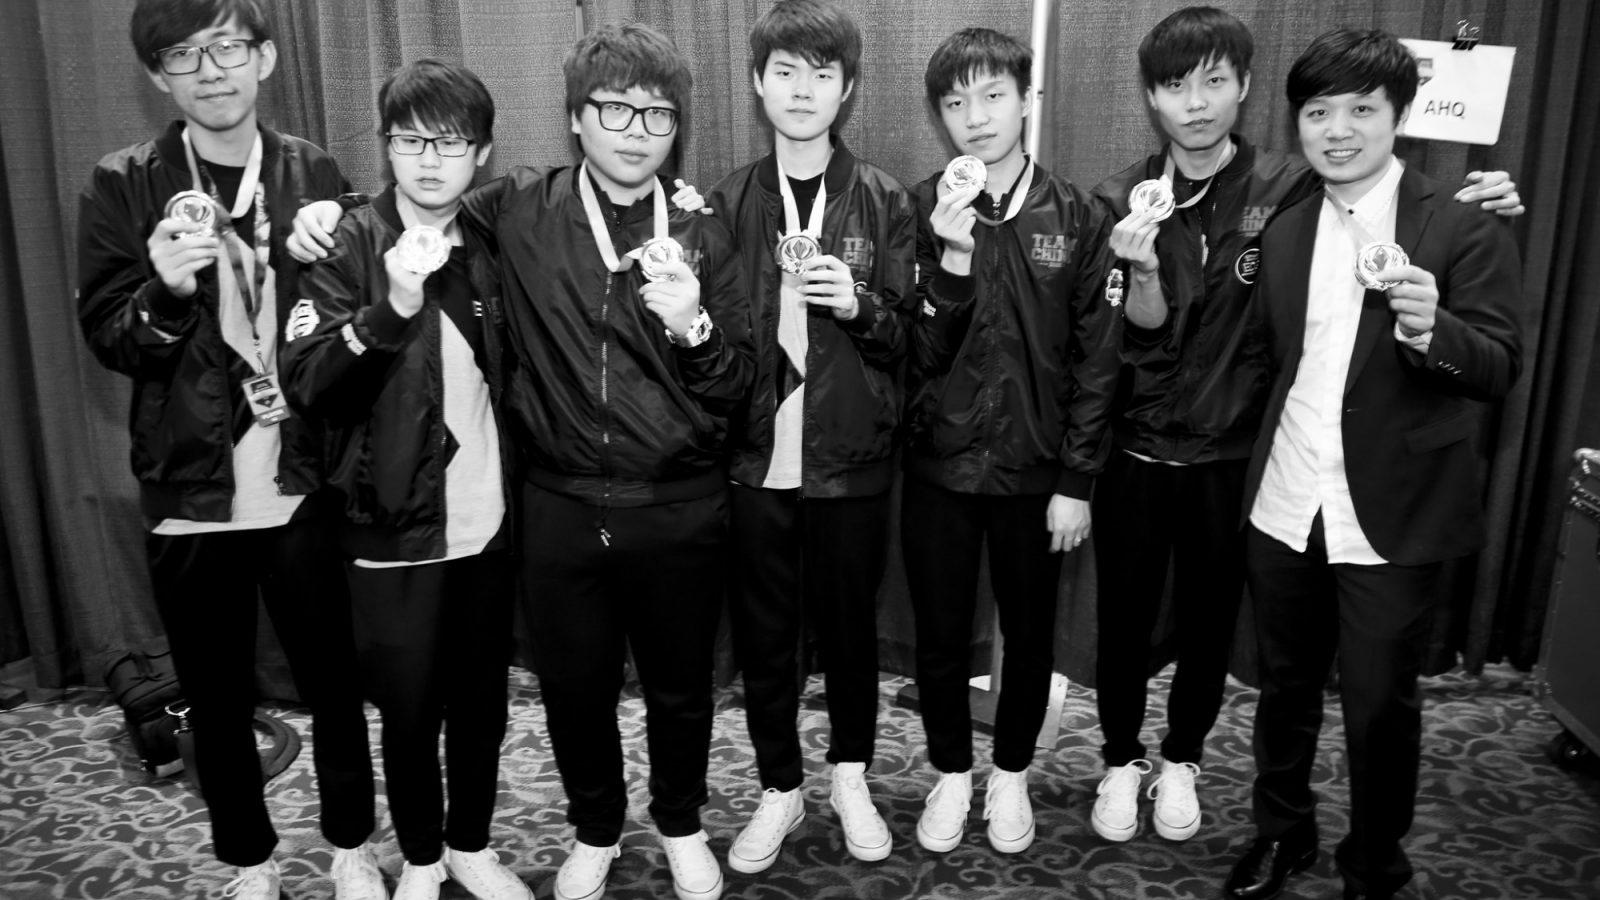 T1 get revenge on MSI 2023 champions with off-meta top laner